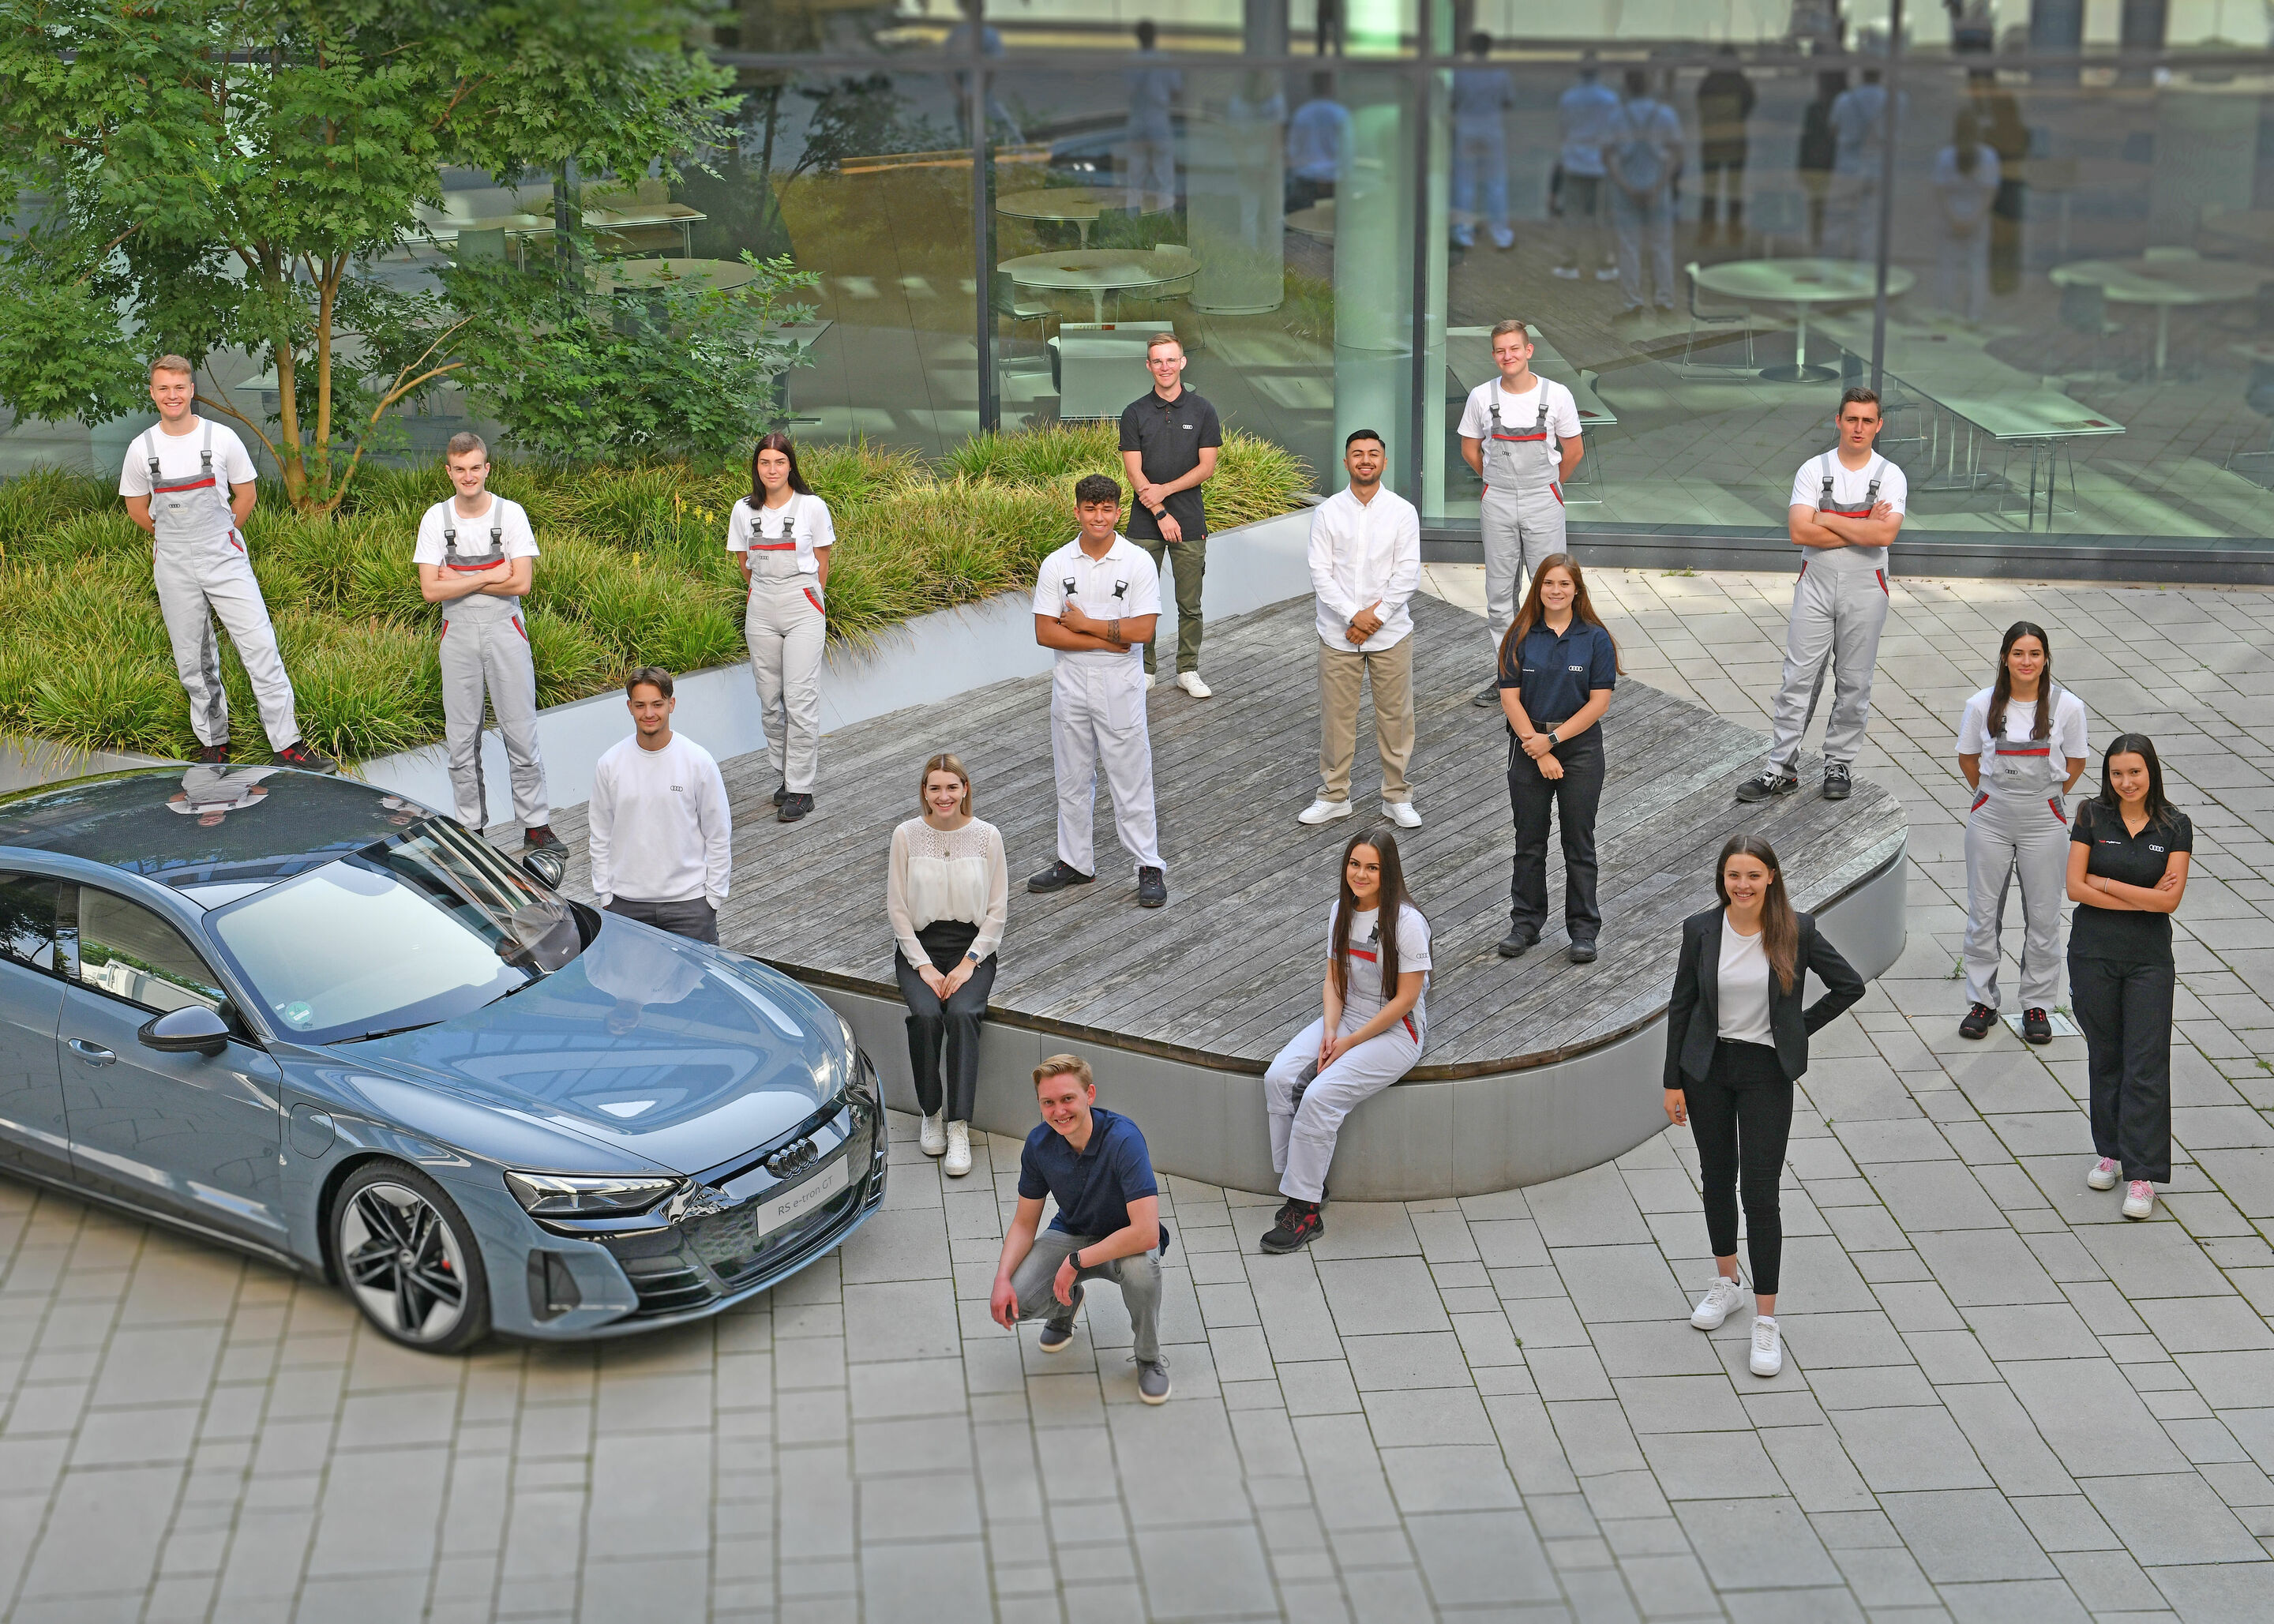 Vocational training at Audi: launching the careers of tomorrow